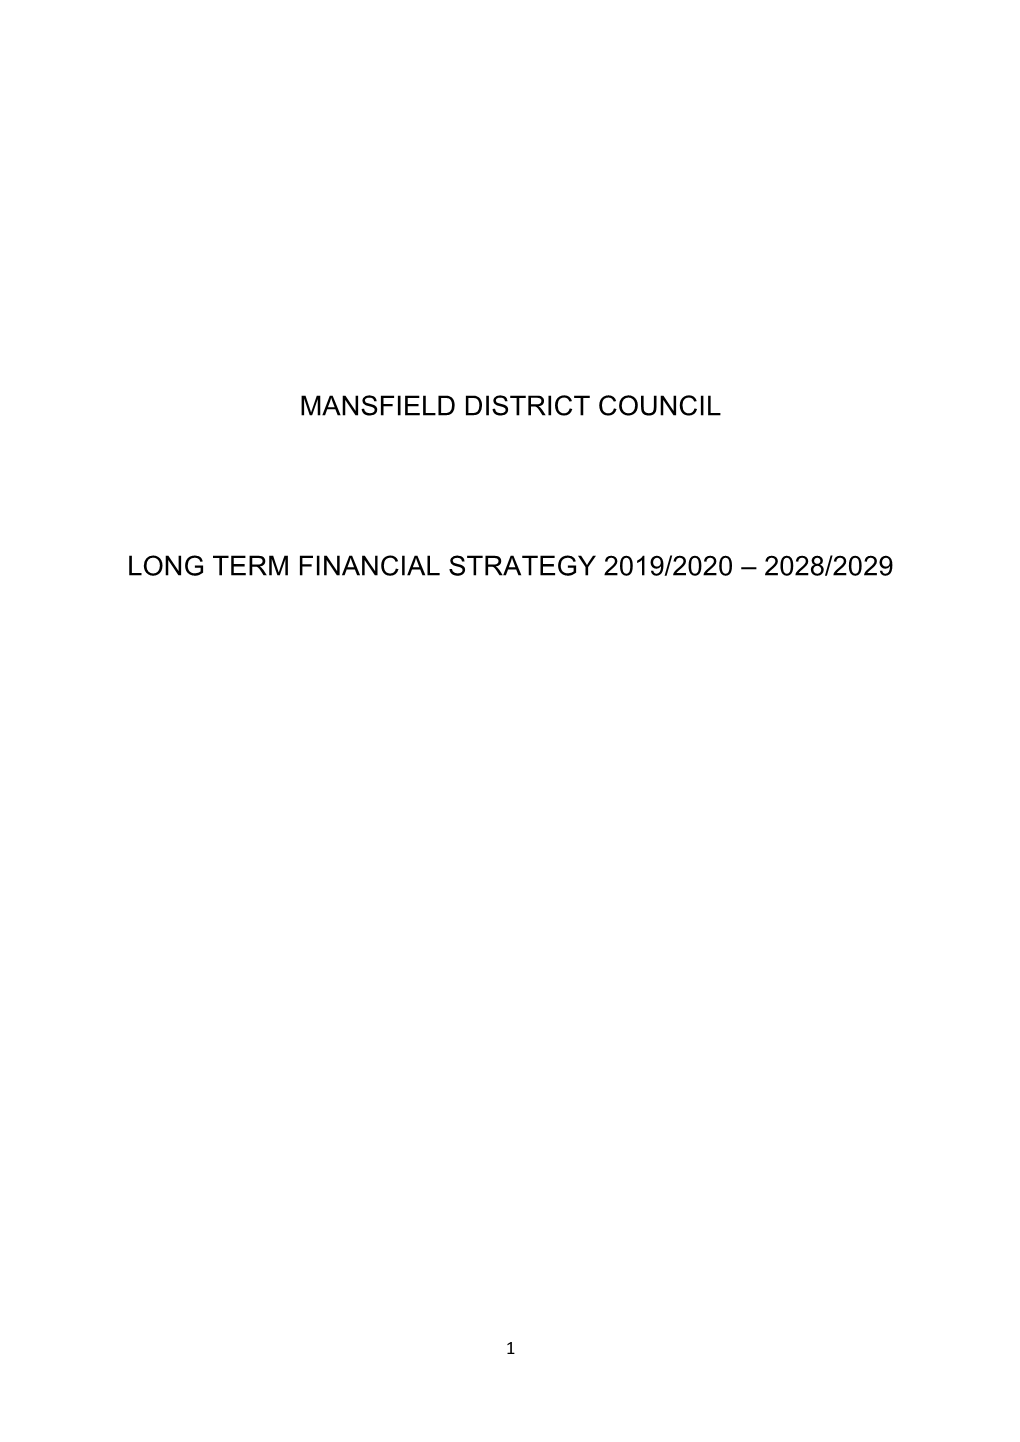 Mansfield District Council Long Term Financial Strategy 2019/2020